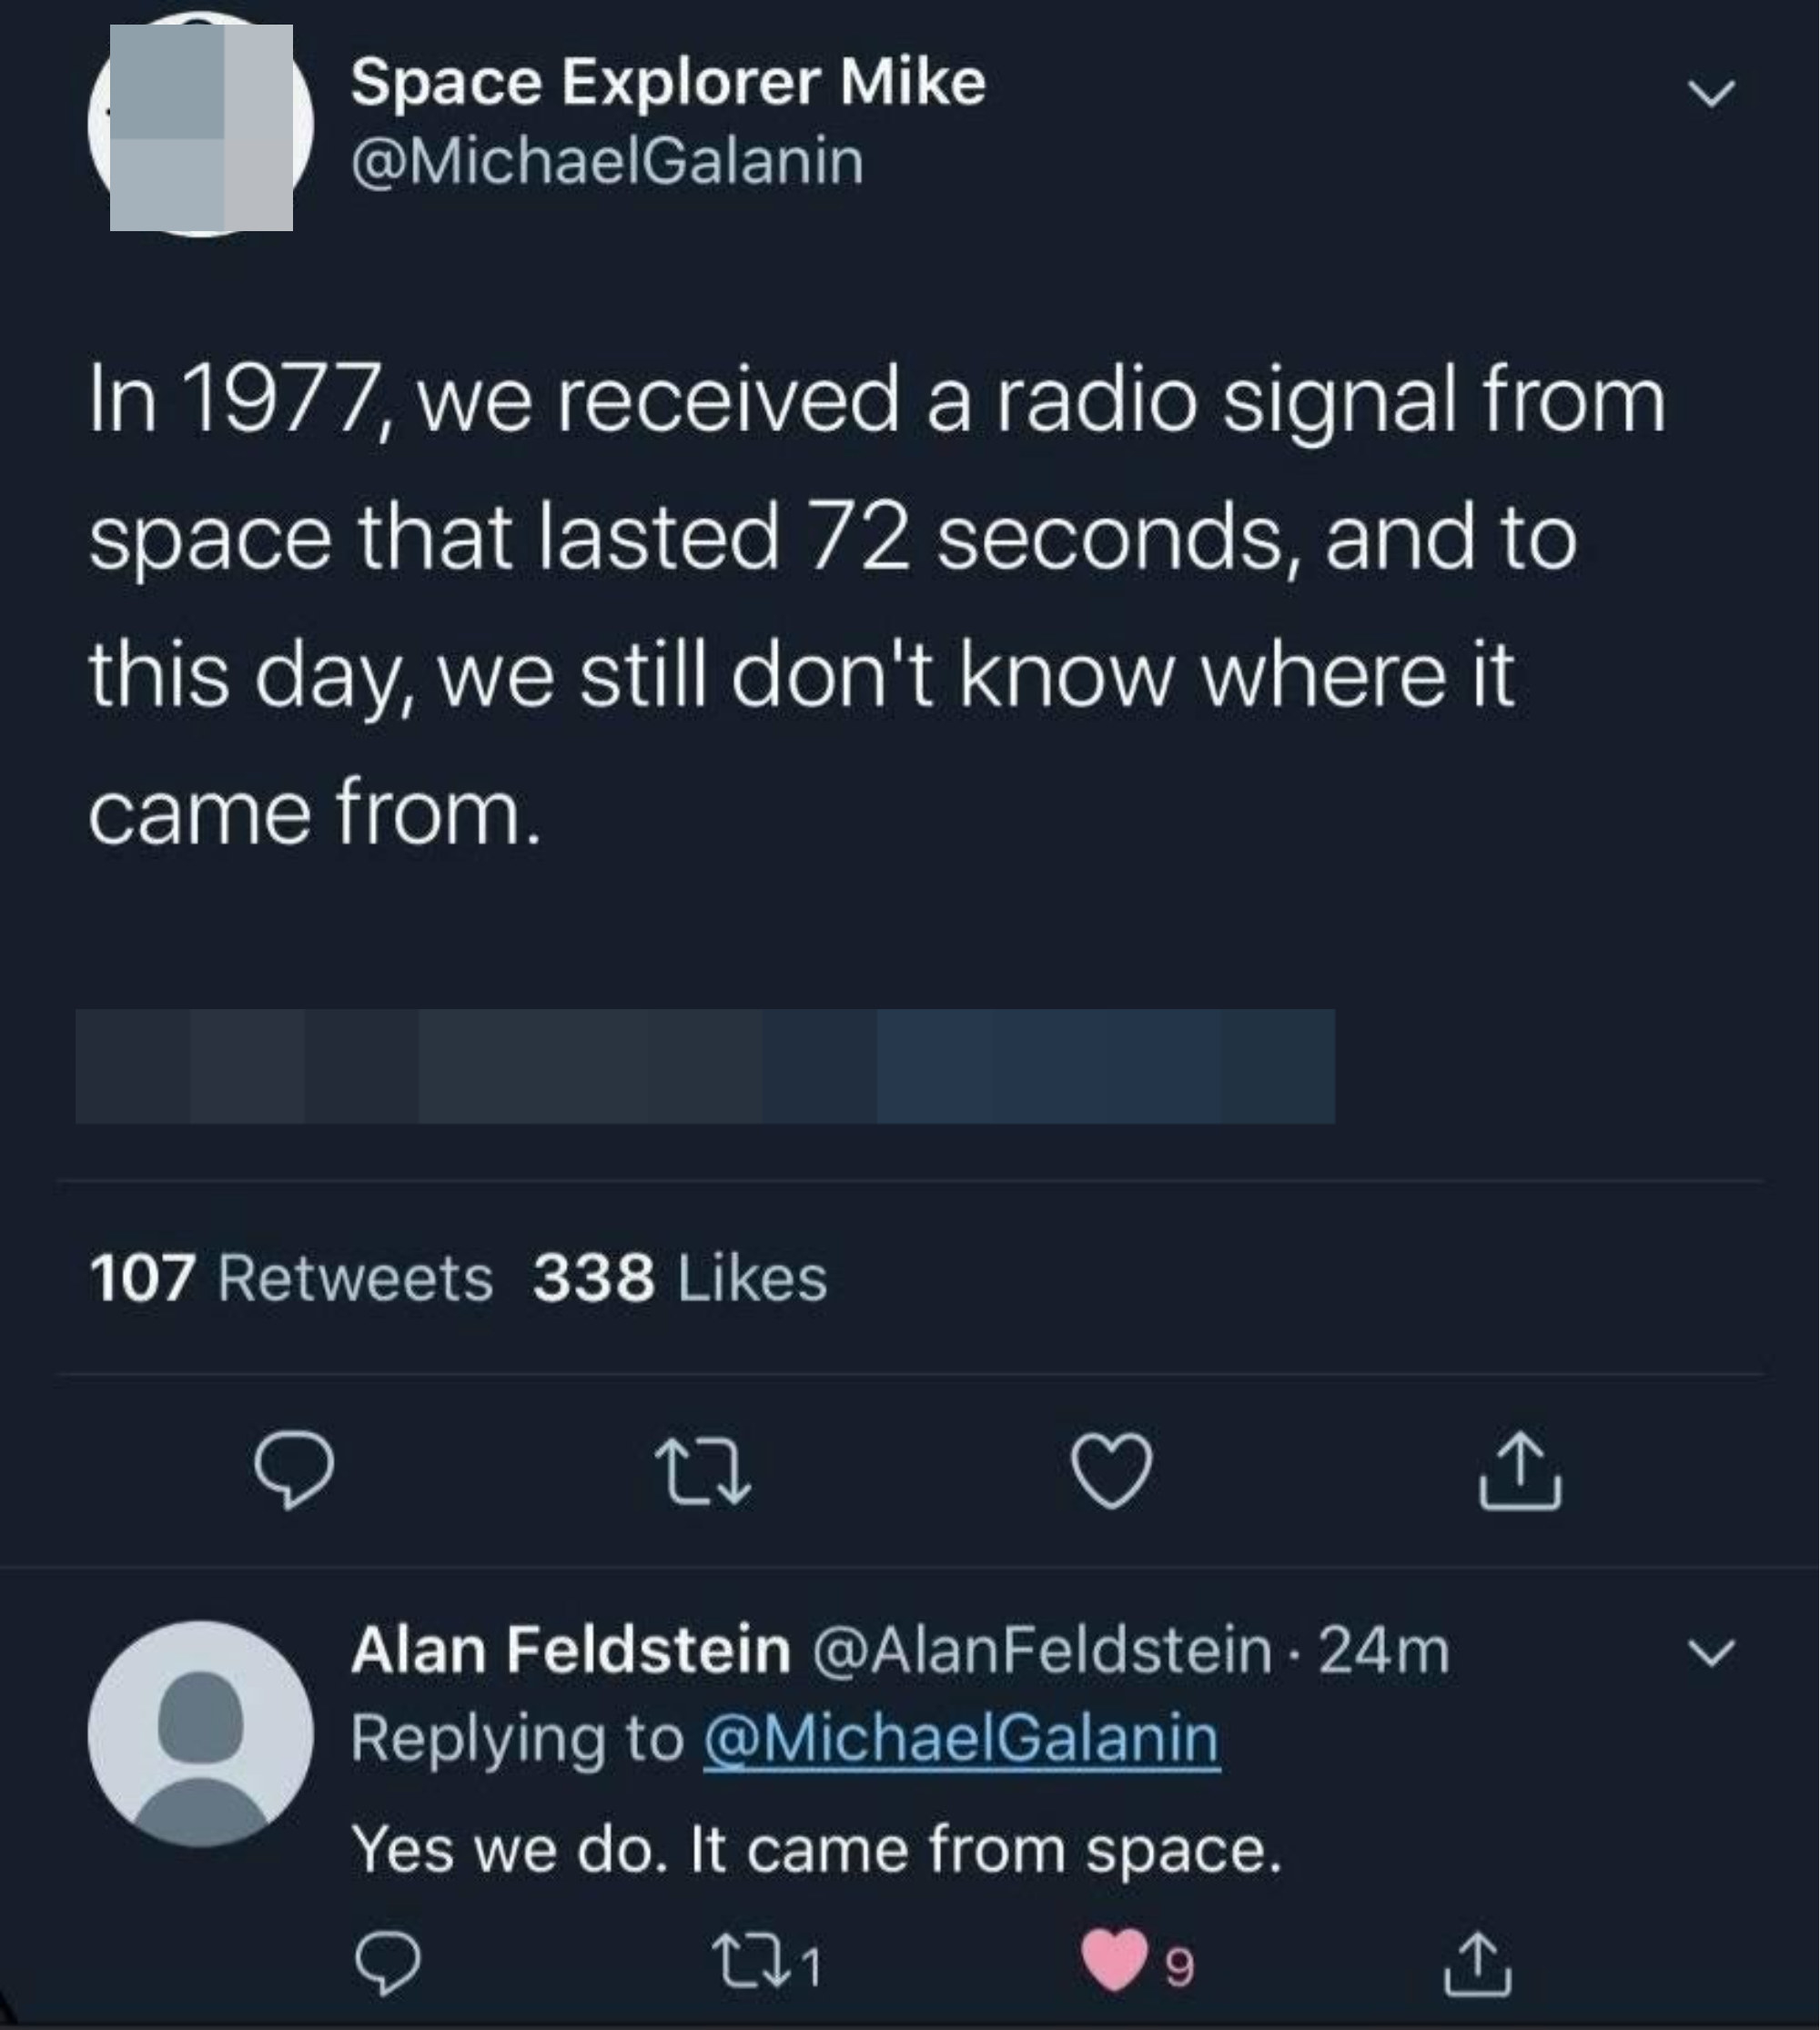 Someone tells a story of a radio signal that came from space and we don&#x27;t know where it came from to this day, and someone else says yes we do, it came from space